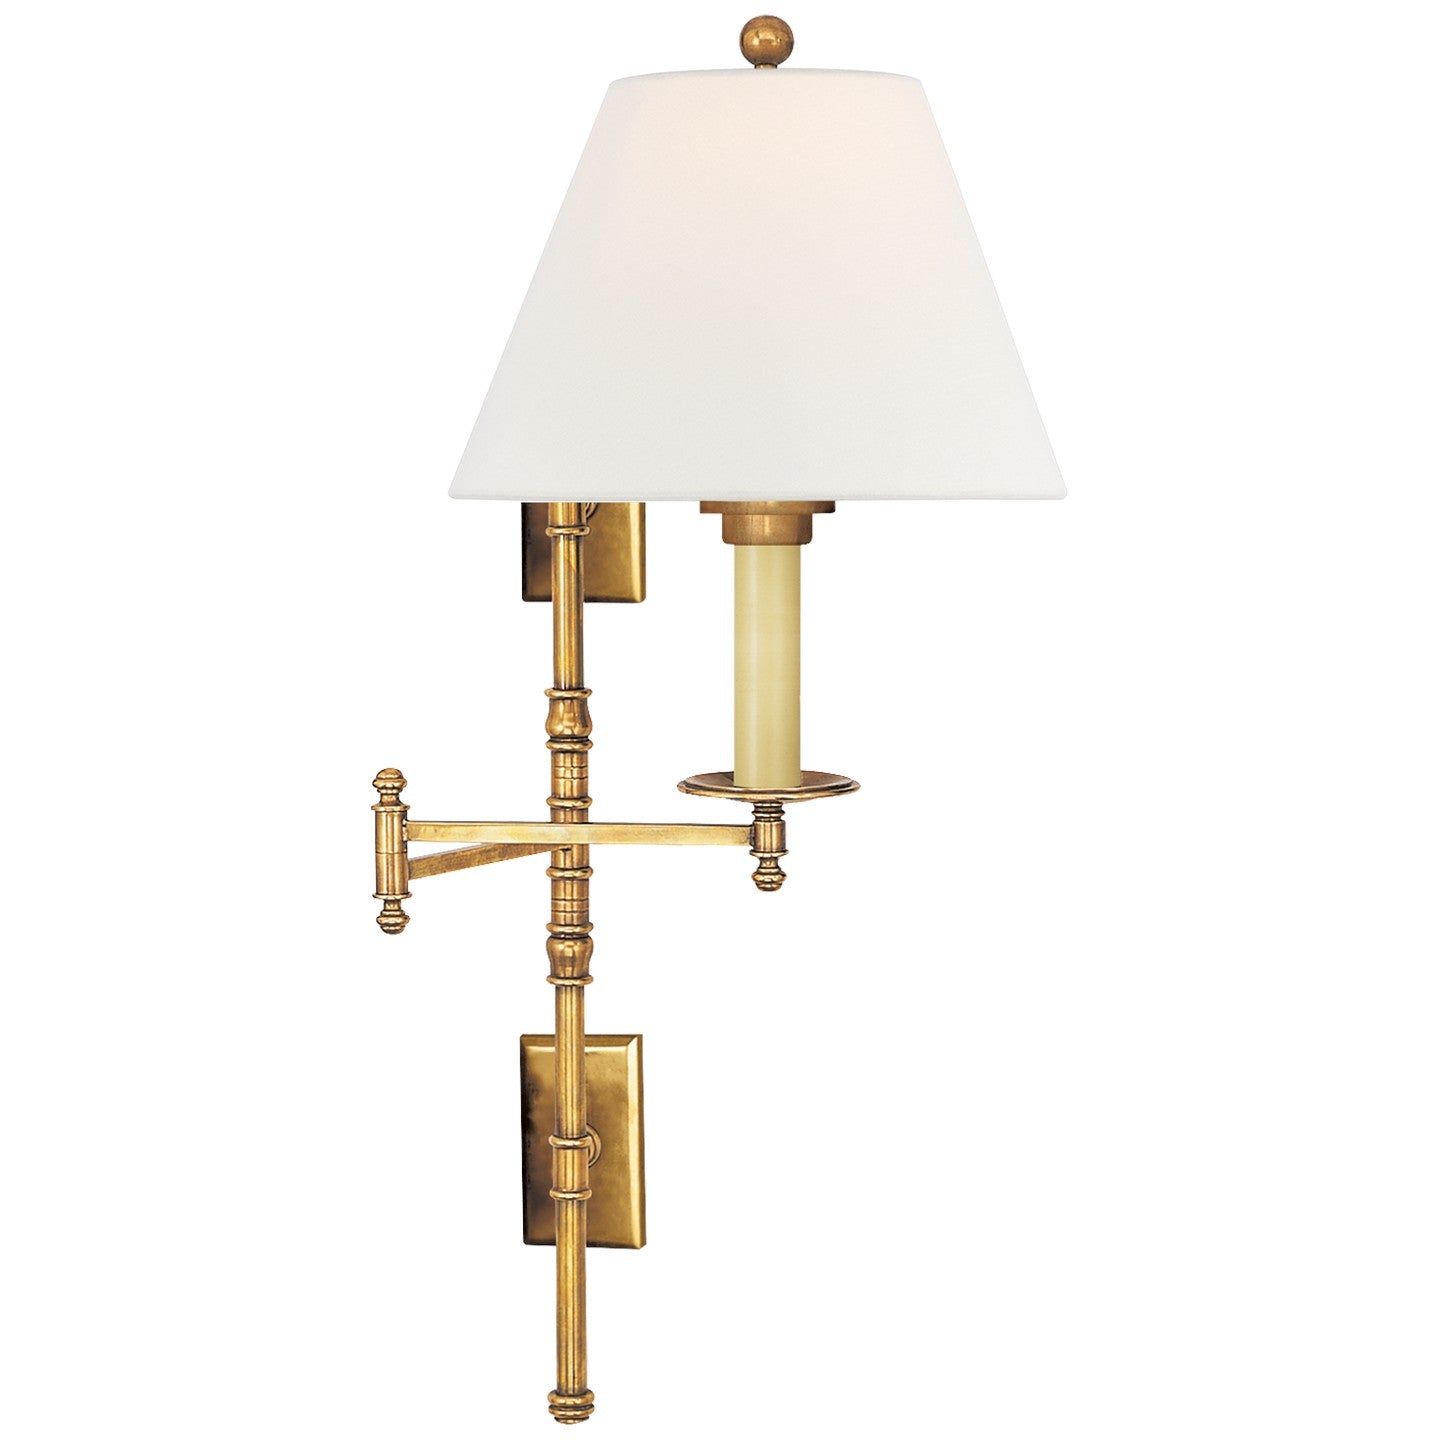 Visual Comfort Signature - CHD 5102AB-L - One Light Swing Arm Wall Sconce - Dorchester3 - Antique-Burnished Brass